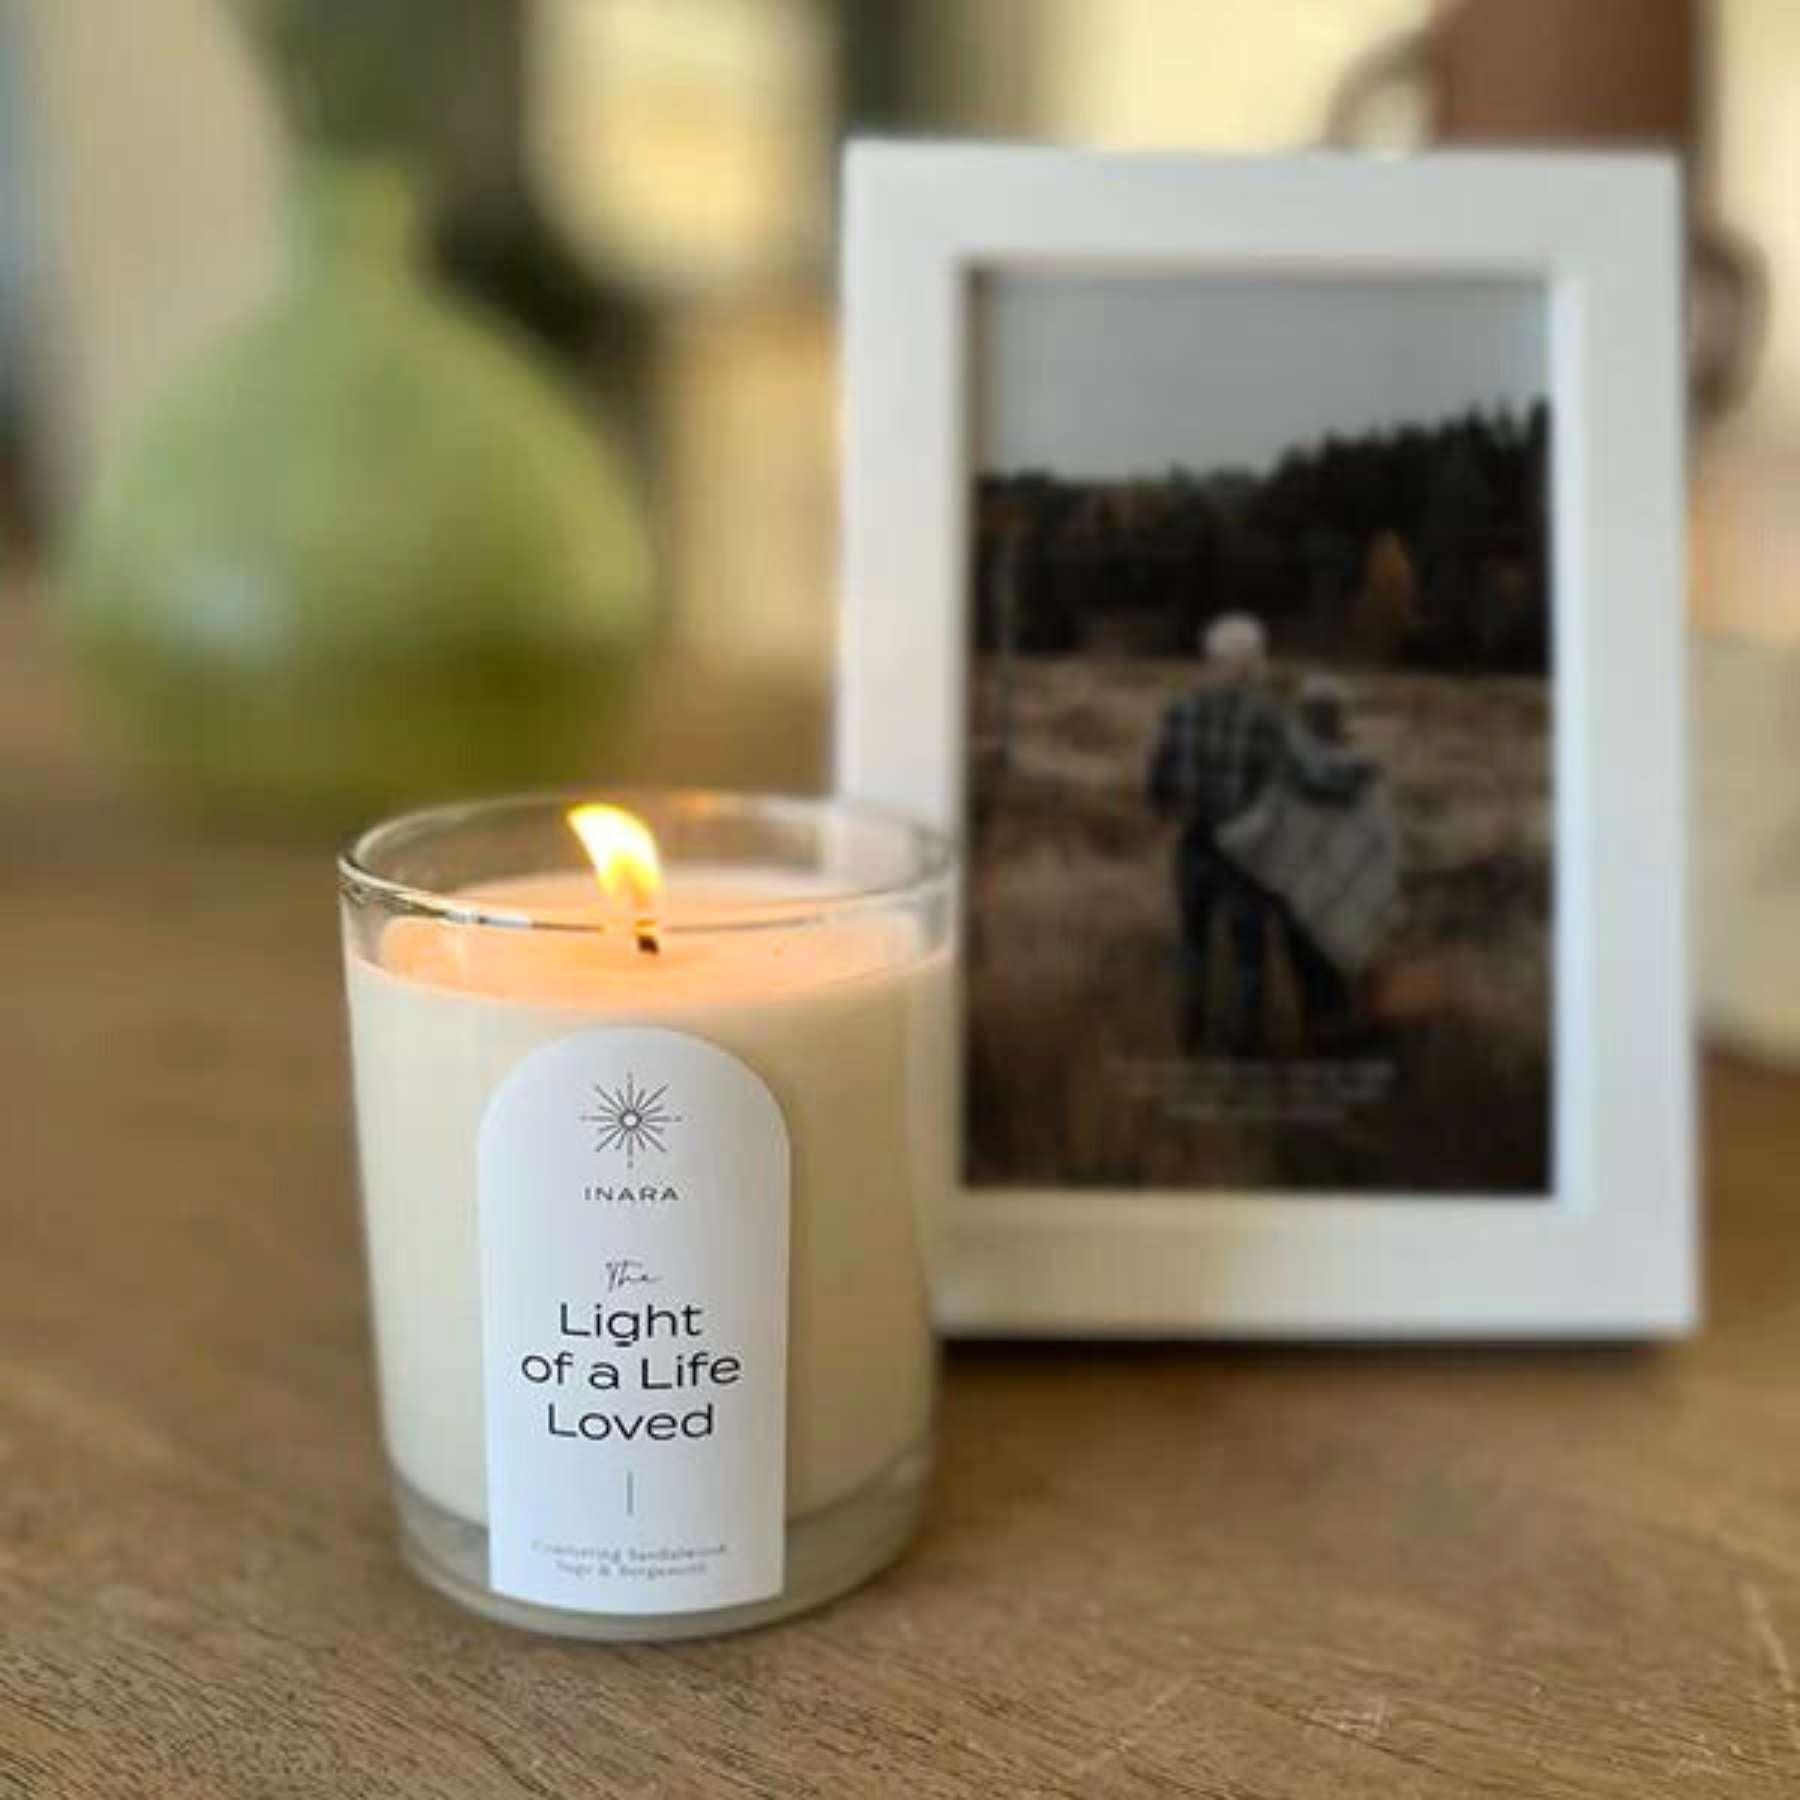 LACUNA picture frame showcasing a heartfelt moment in an autumnal setting, complete with an endearing quote, available from Fabulous Flowers and Gifts.